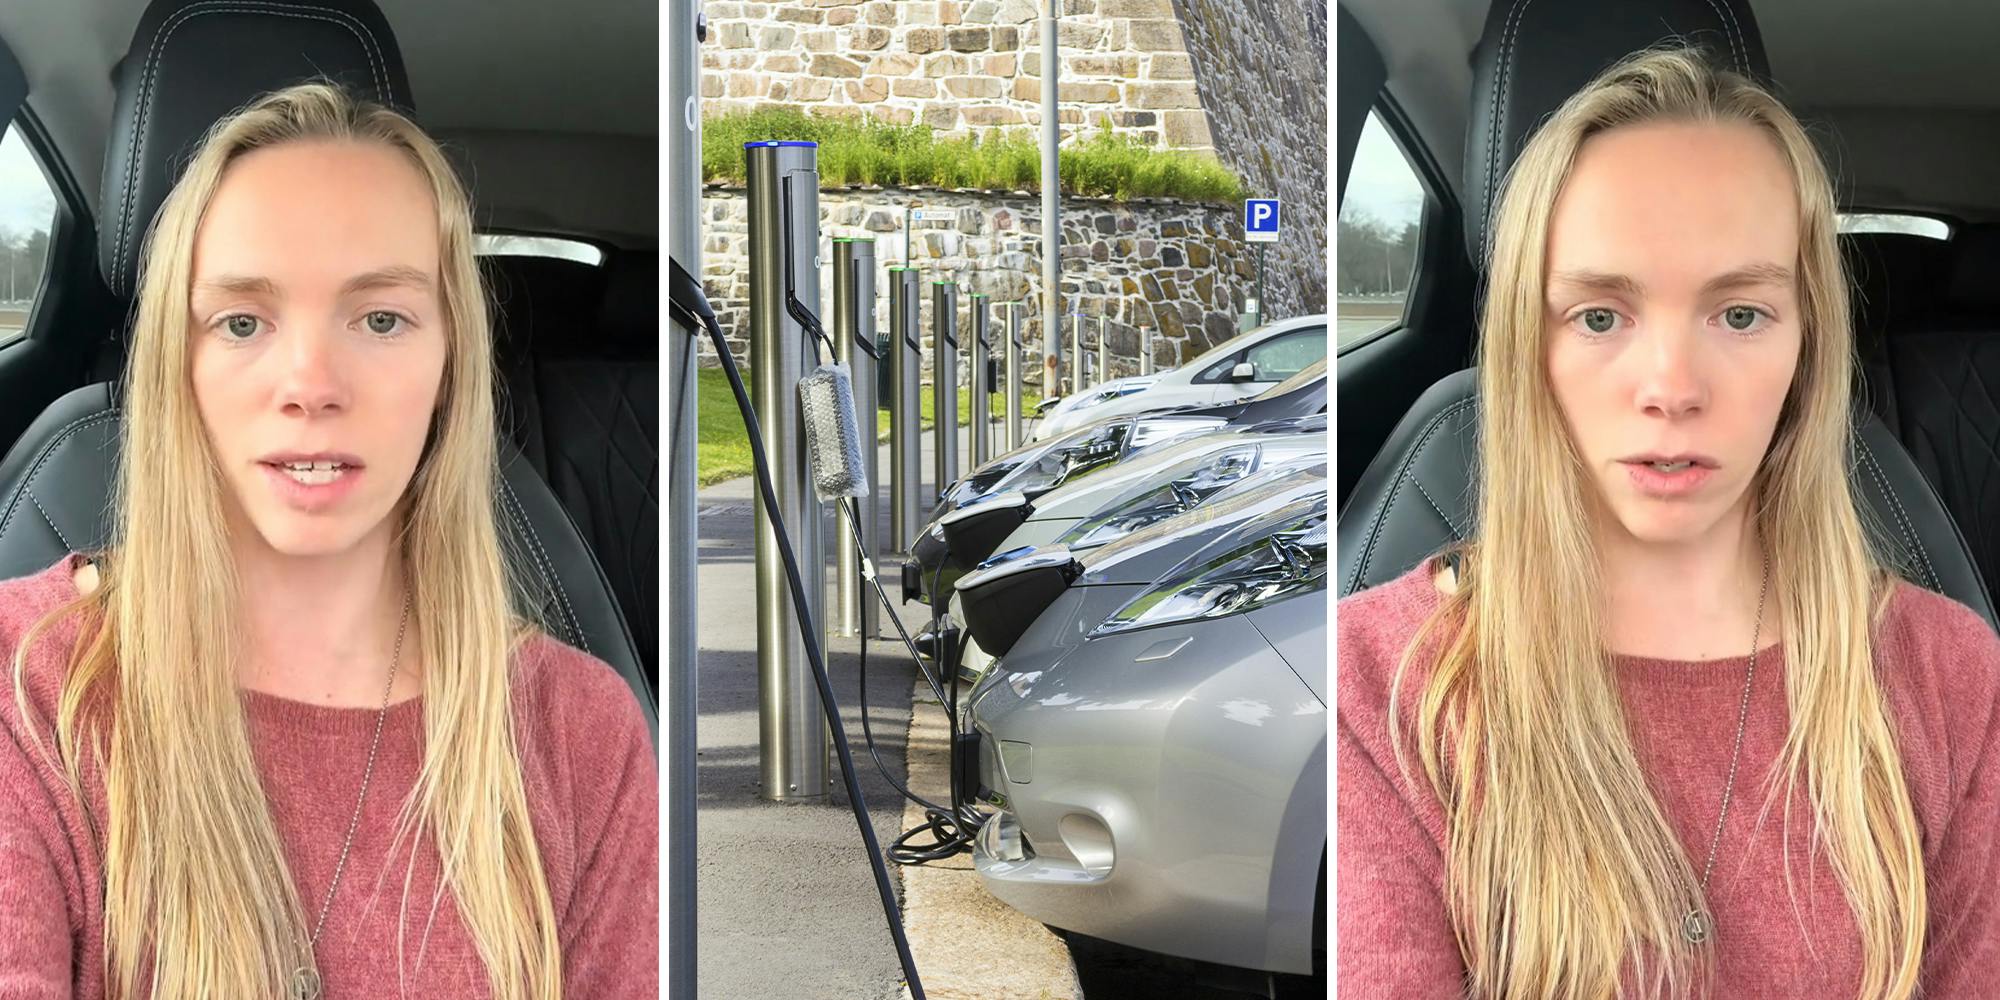 Woman has to return electric car. It dies before she can drop it off